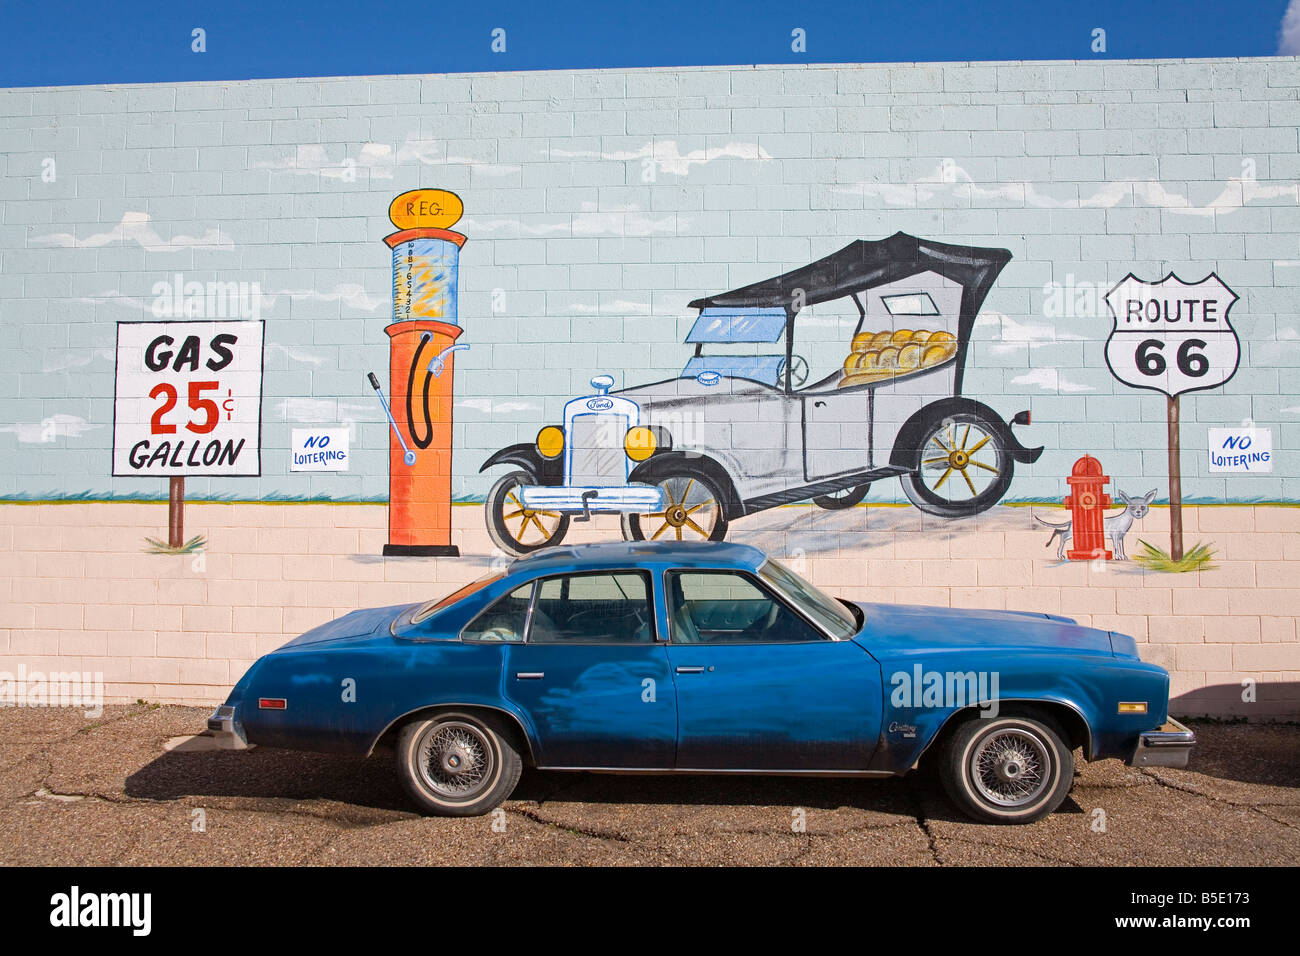 Mural painted by Servo on Auto Repair Shop, Holbrook City, Route 66, Arizona, USA, North America Stock Photo